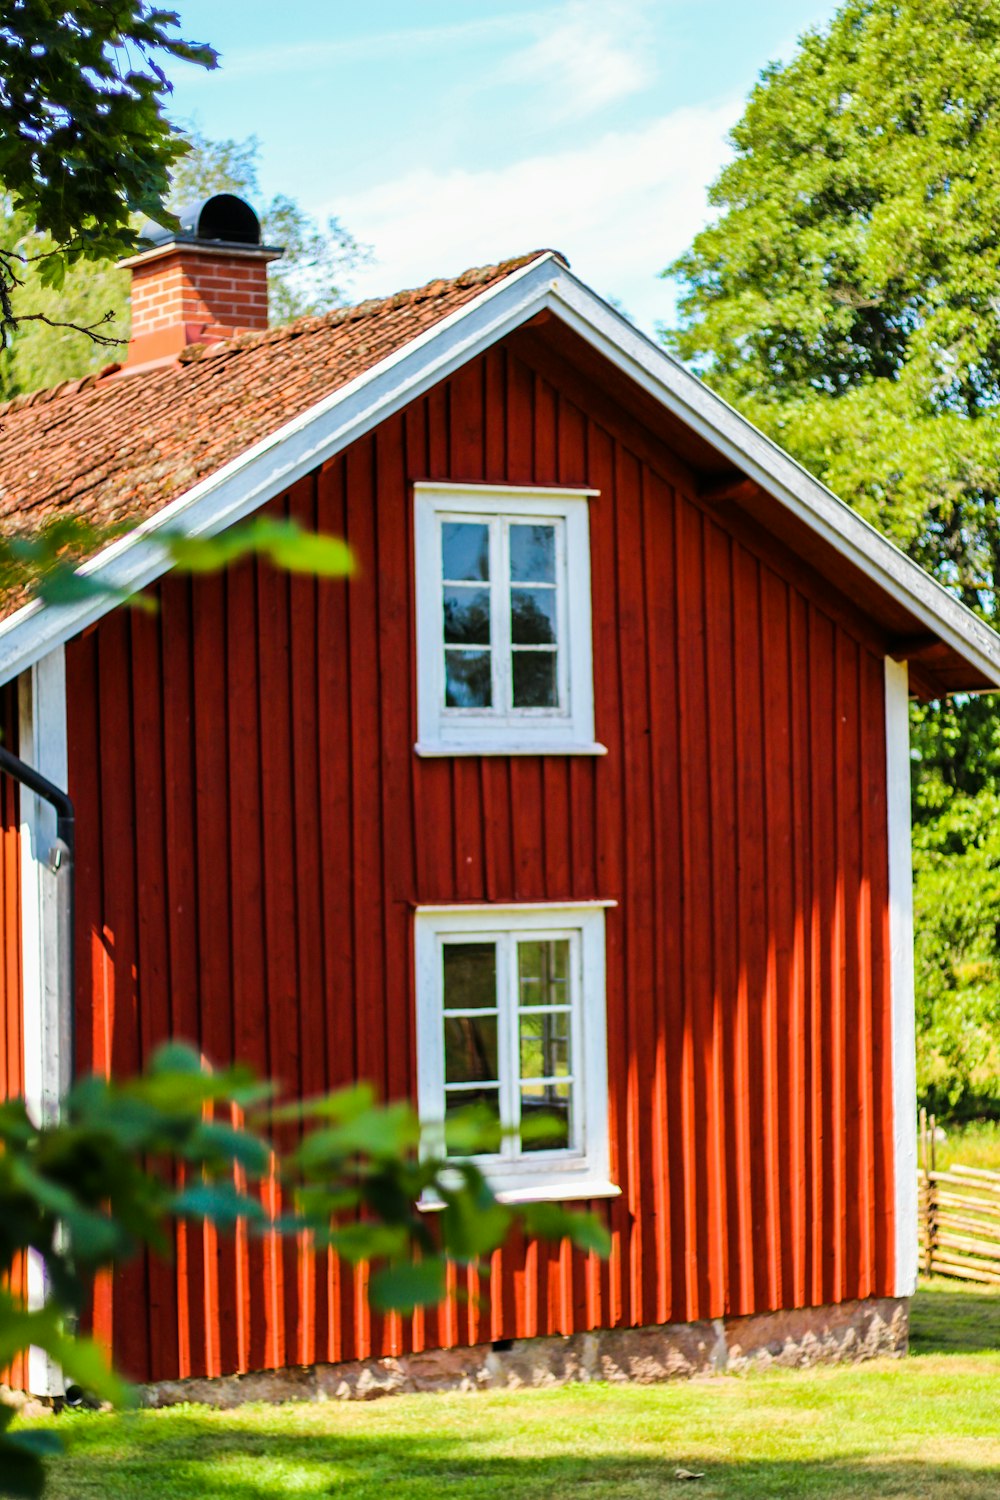 red and white wooden house near green trees during daytime